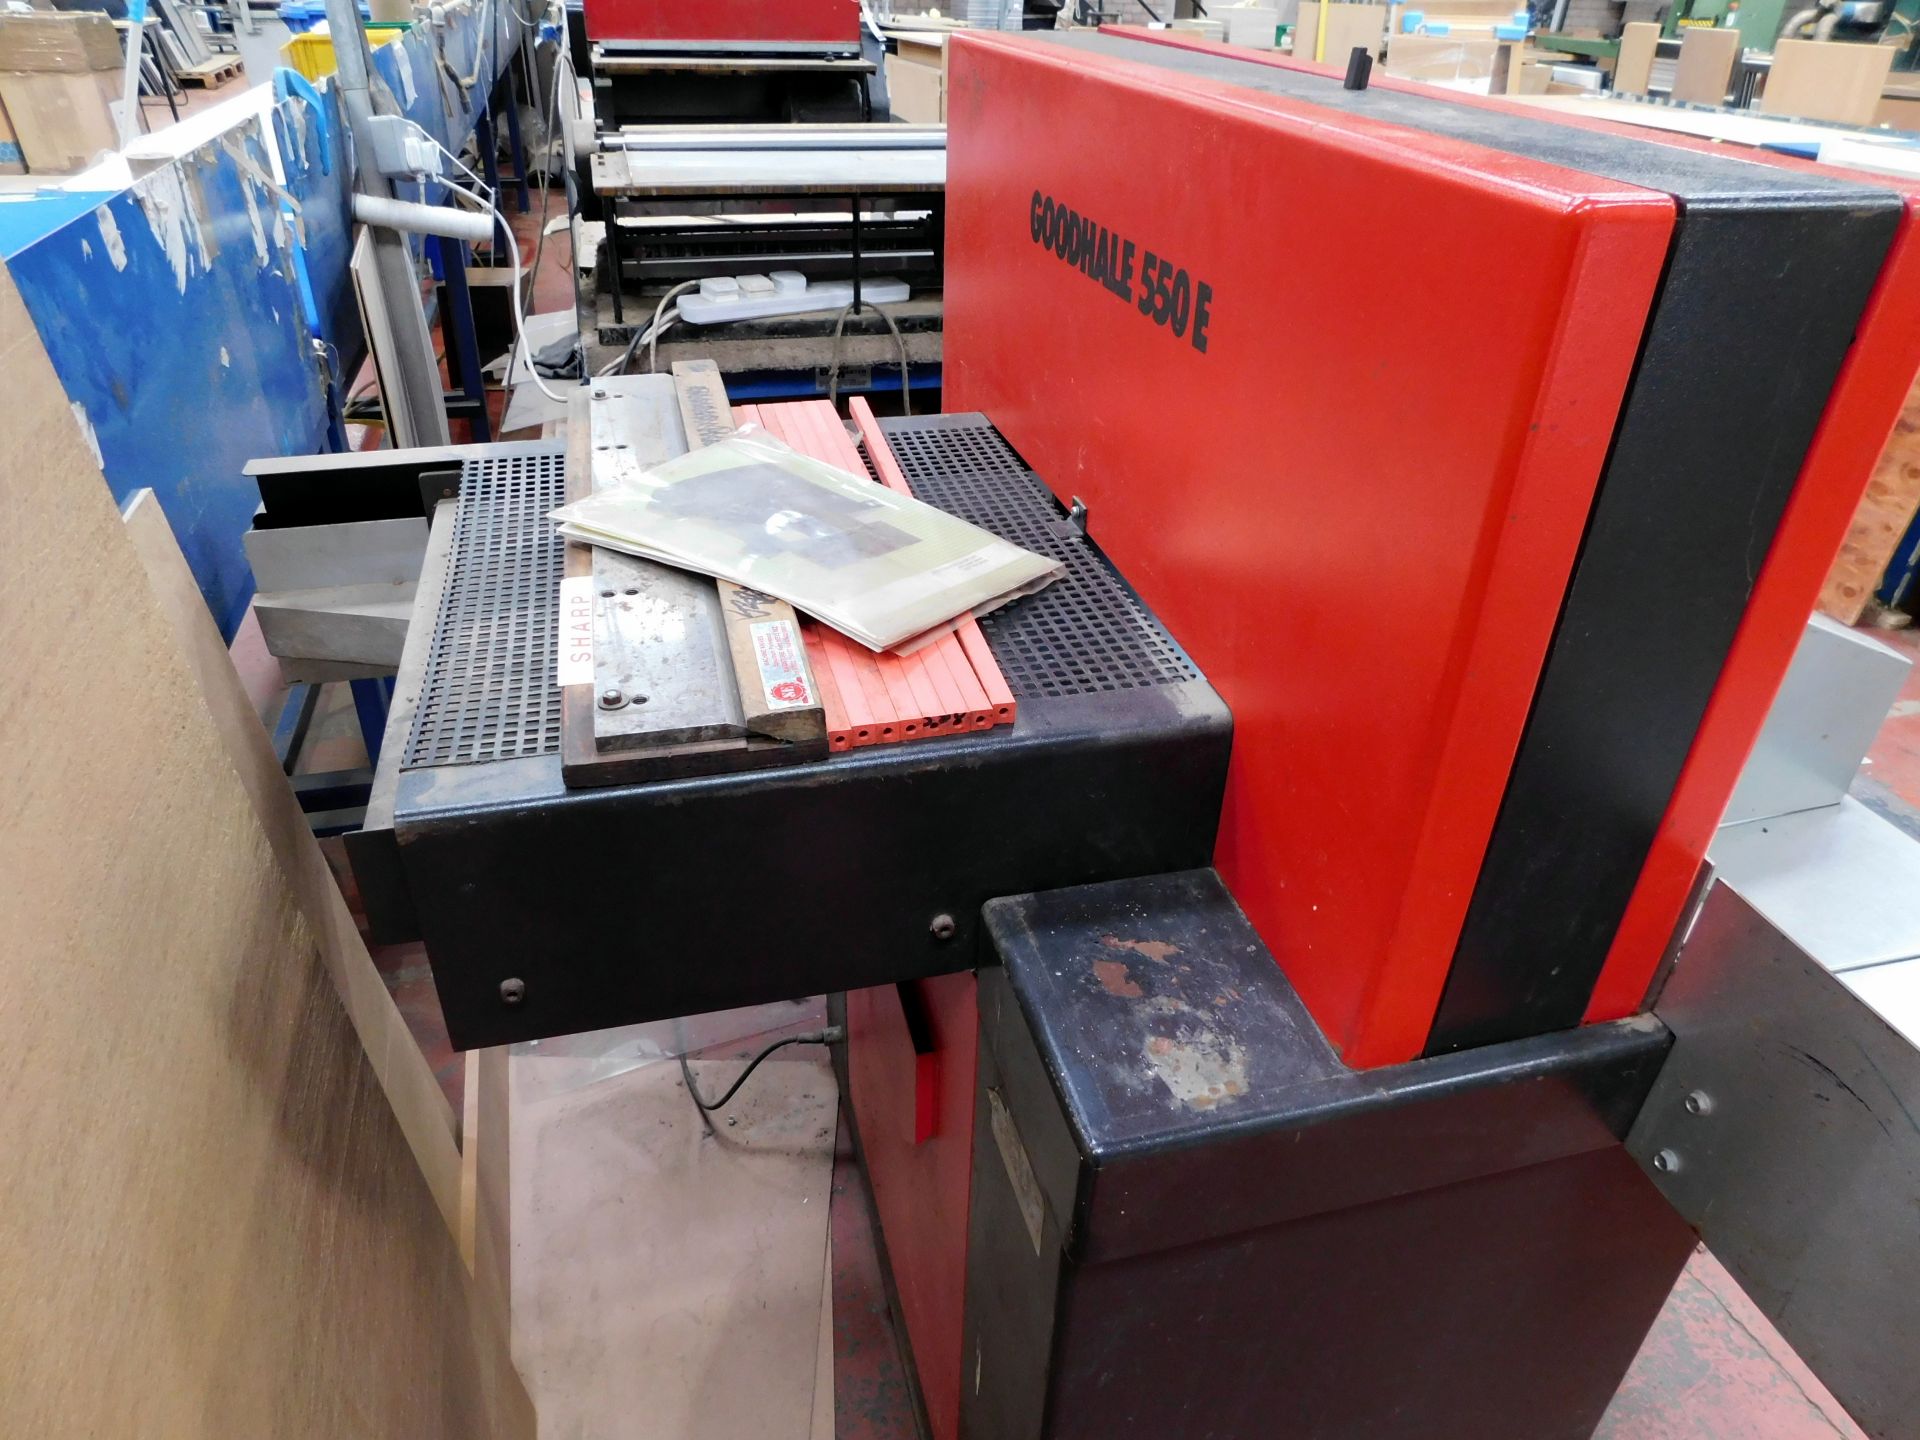 Goodhale Multi Cut 10/550E 120bar Guillotine, 240v (Collection – Friday 25th, Tuesday 29th or - Image 4 of 5